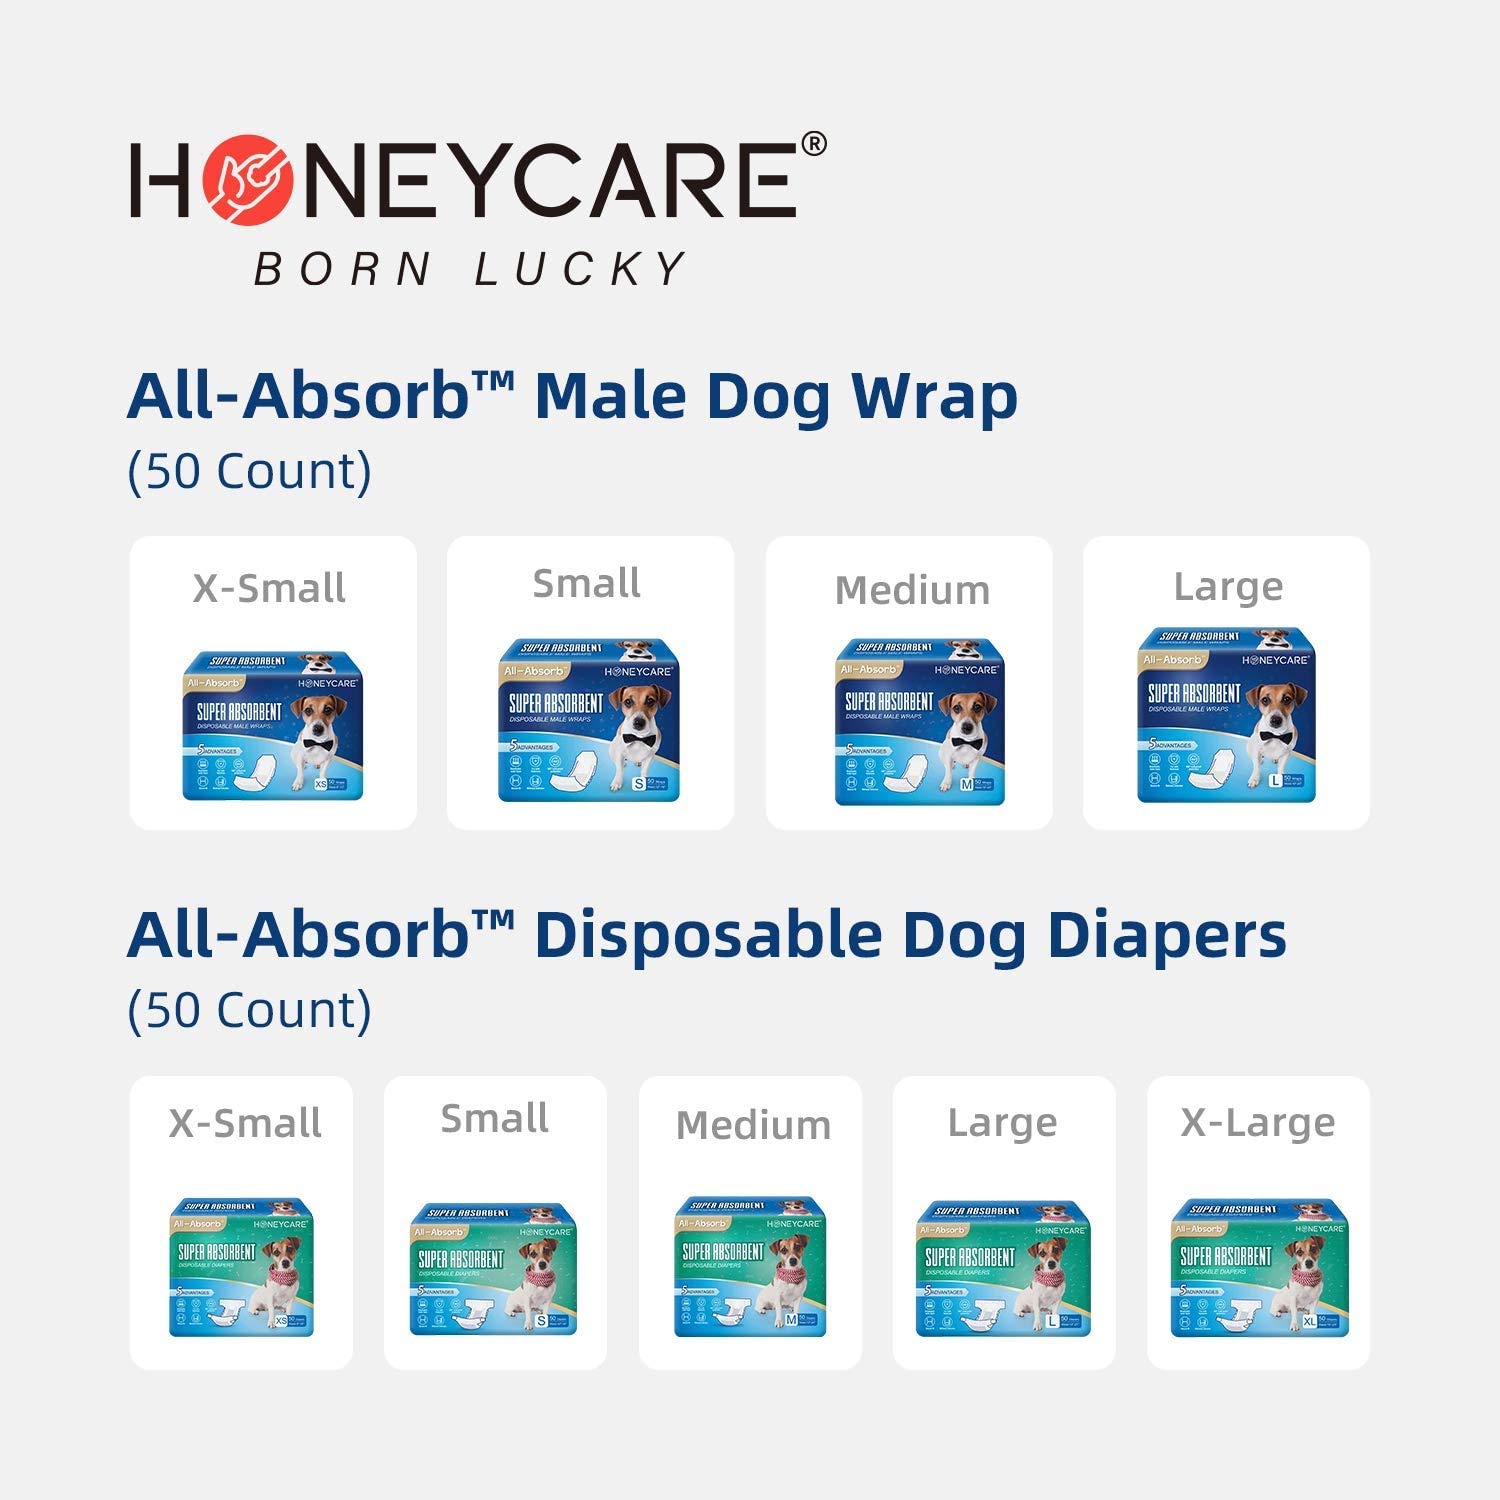 HONEY CARE All-Absorb Puppy Training Pads | Doggie Potty Pads Absorb Eliminating Urine Odor, Ultra Charcoal Dog Pee Pad (Carbon, L 22x23 inch, 100ct)